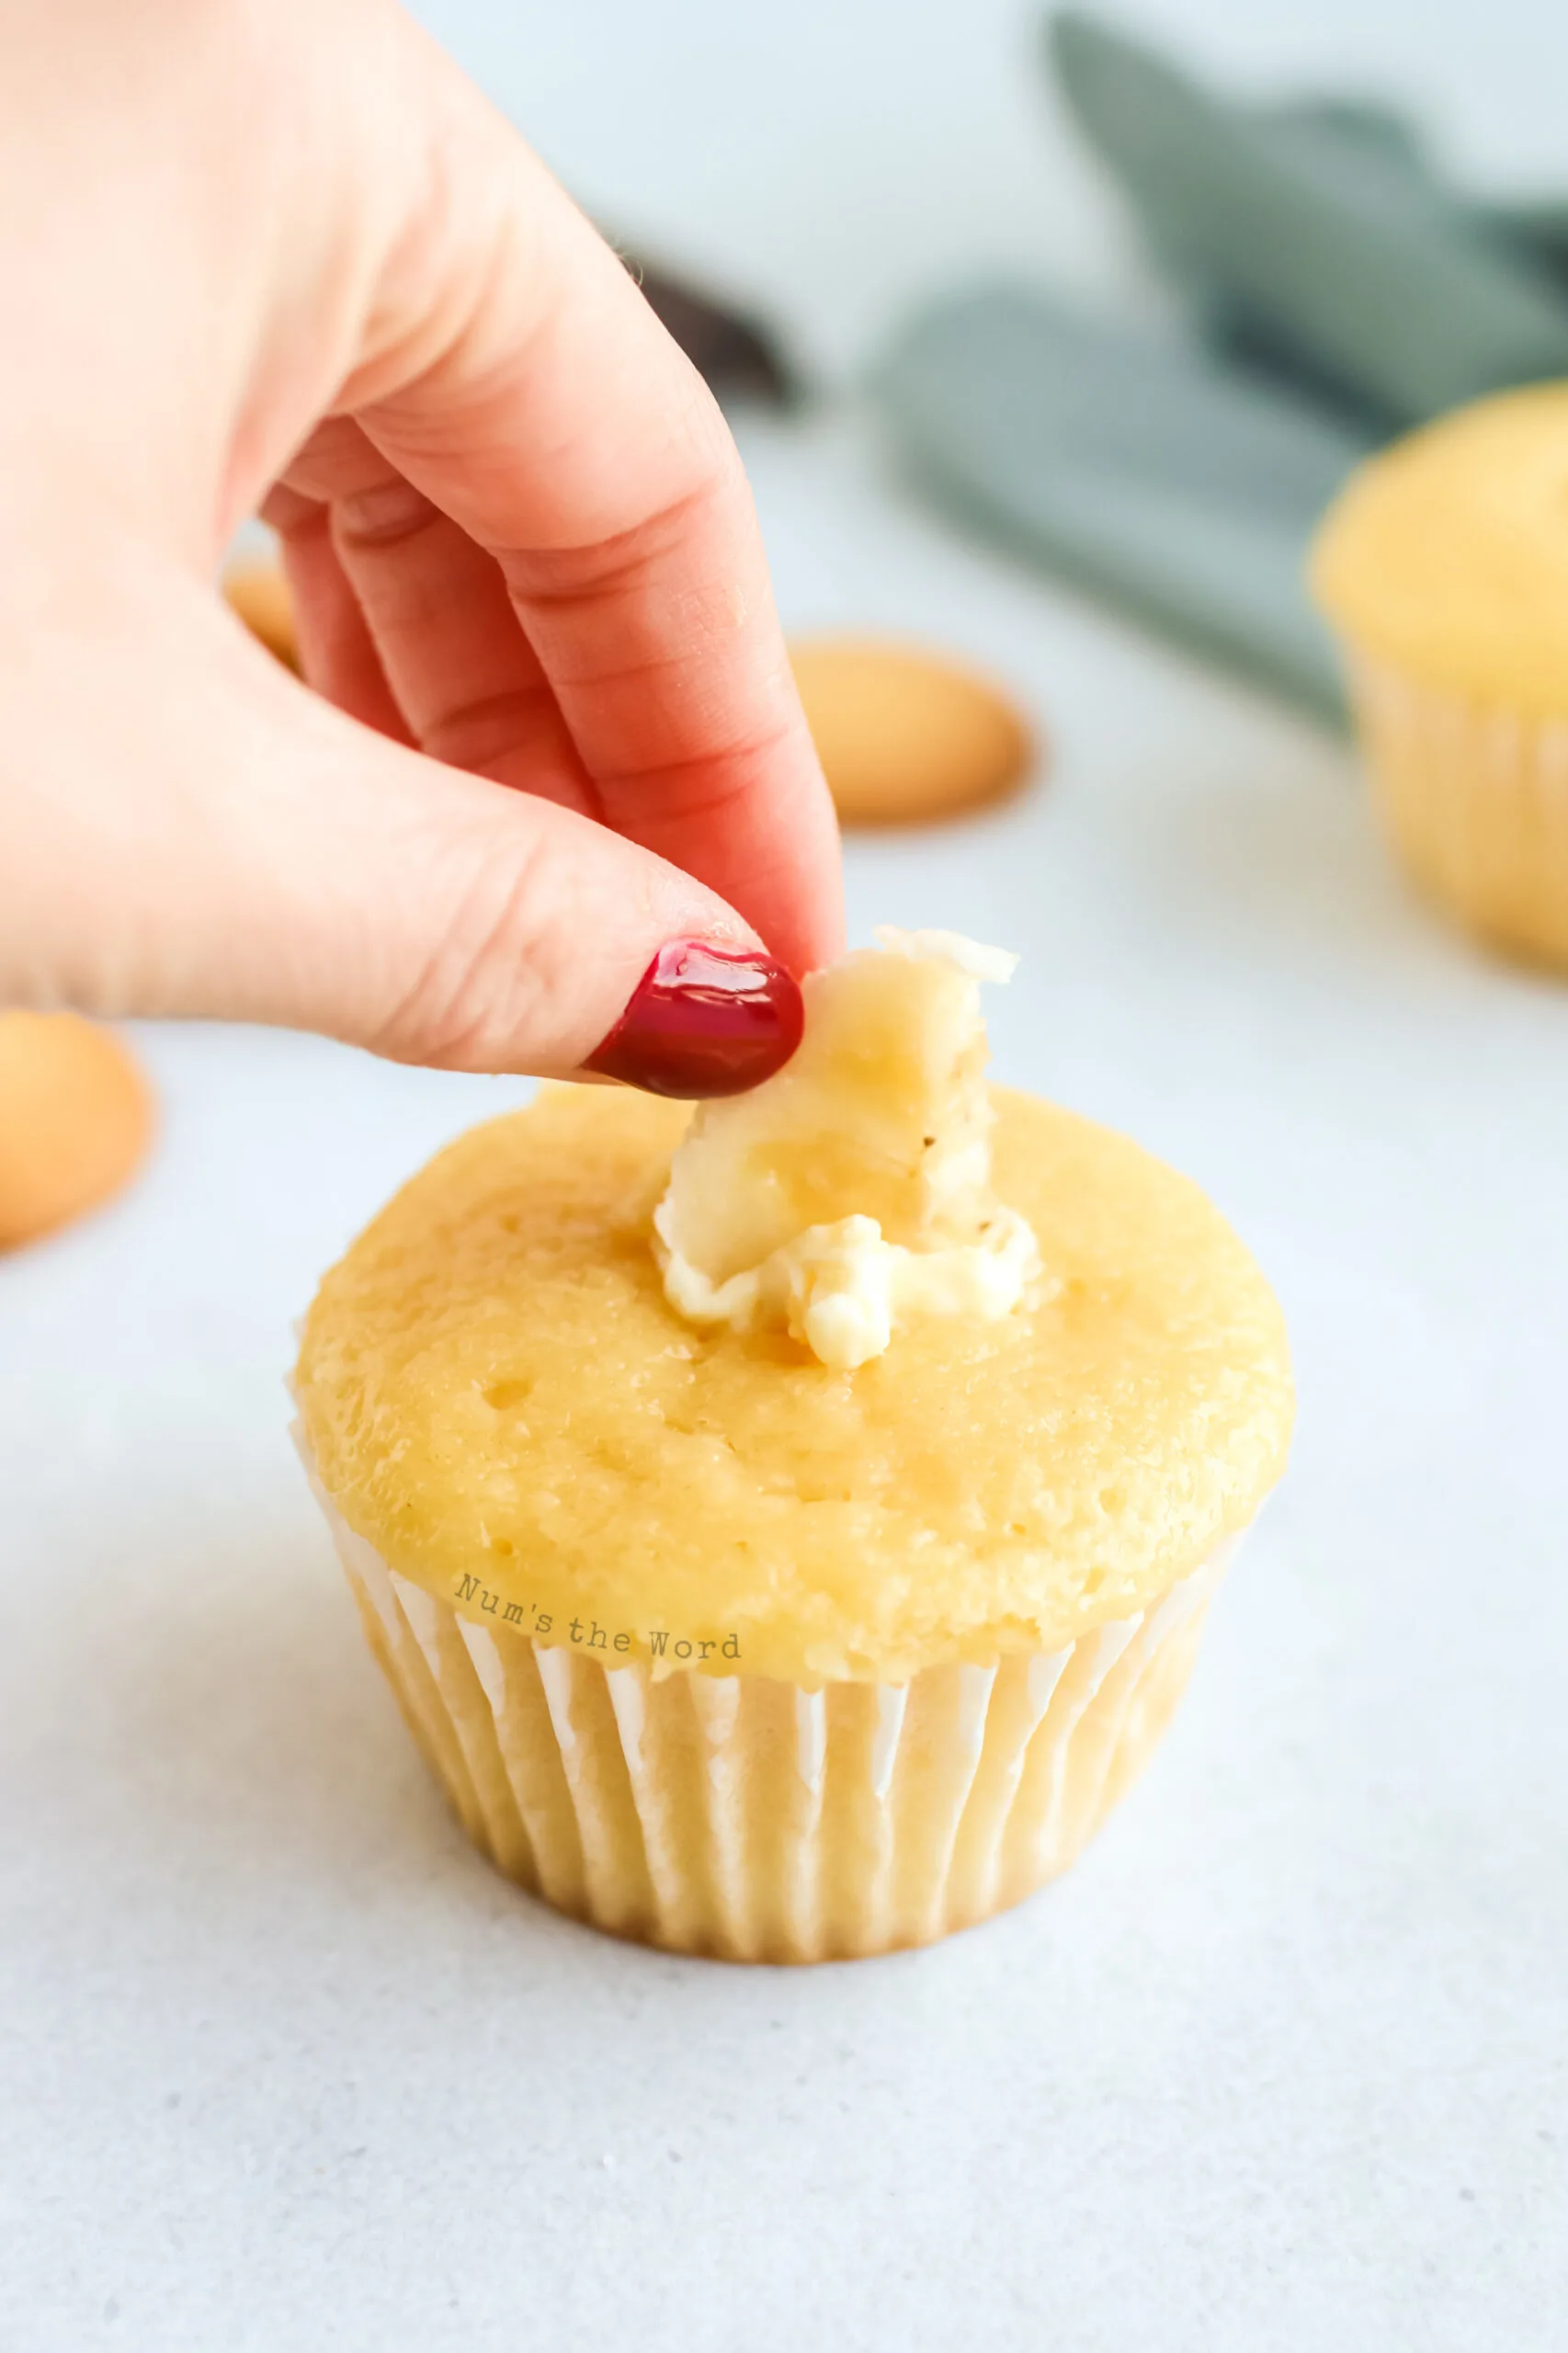 banana slice being pushed into the middle of the cupcake.